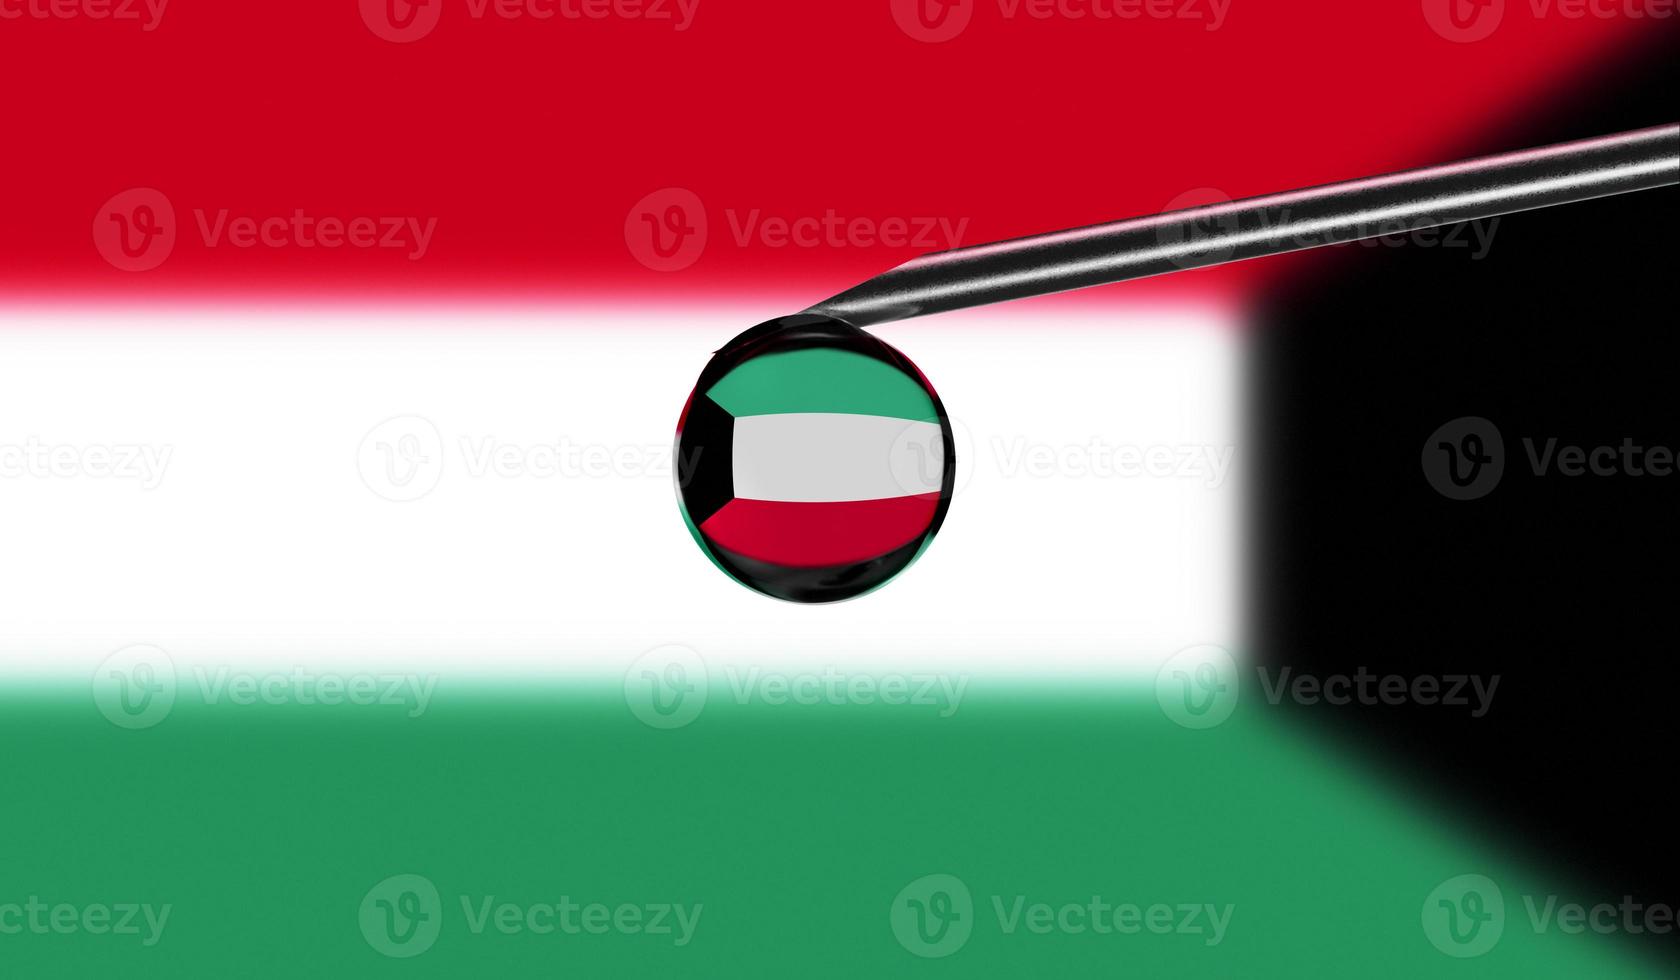 Vaccine syringe with drop on needle against national flag of Kuwait background. Medical concept vaccination. Coronavirus Sars-Cov-2 pandemic protection. National safety idea. photo